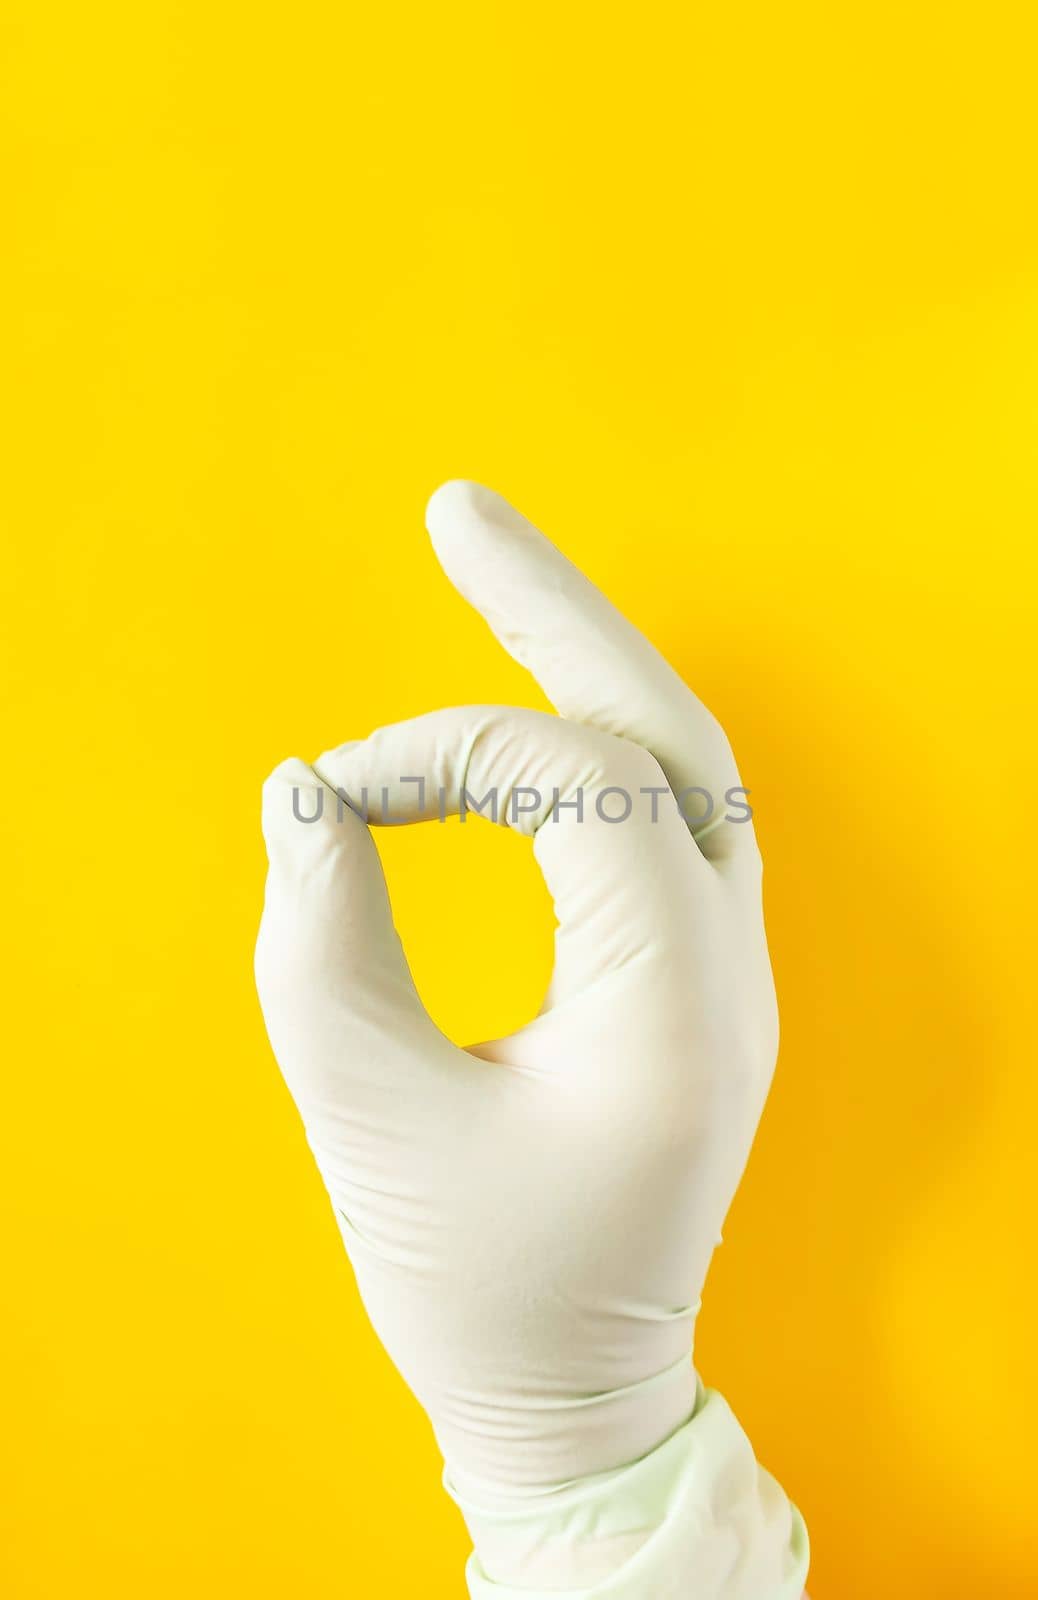 Hand in rubber glove. OK sign on bright yellow background